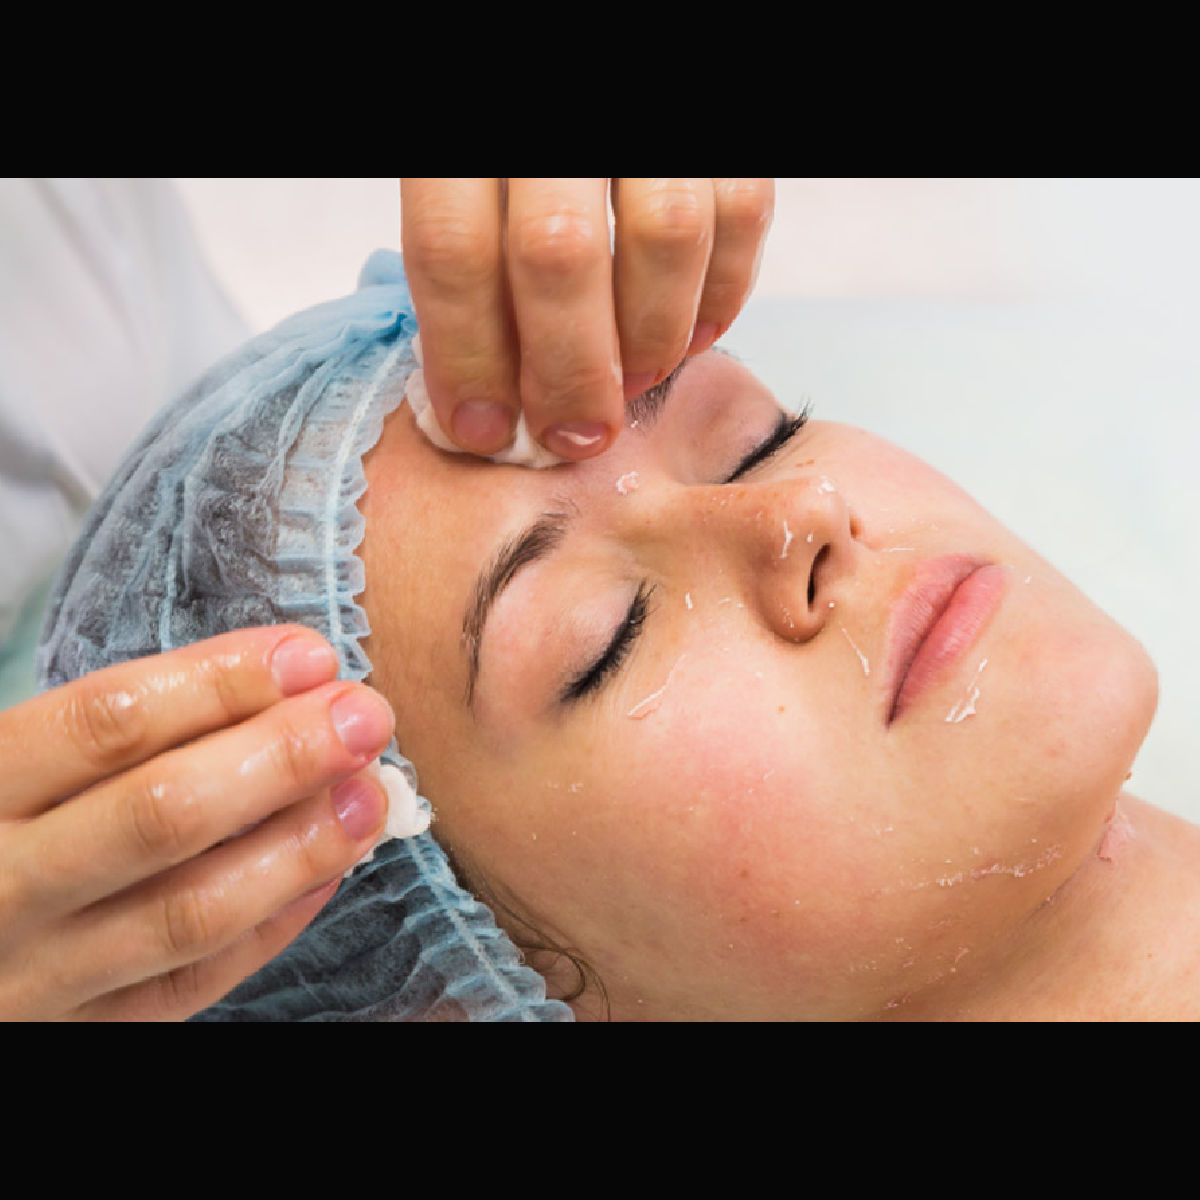 Chemical Peel Treatment: Benefits, Procedure, Before And After Results